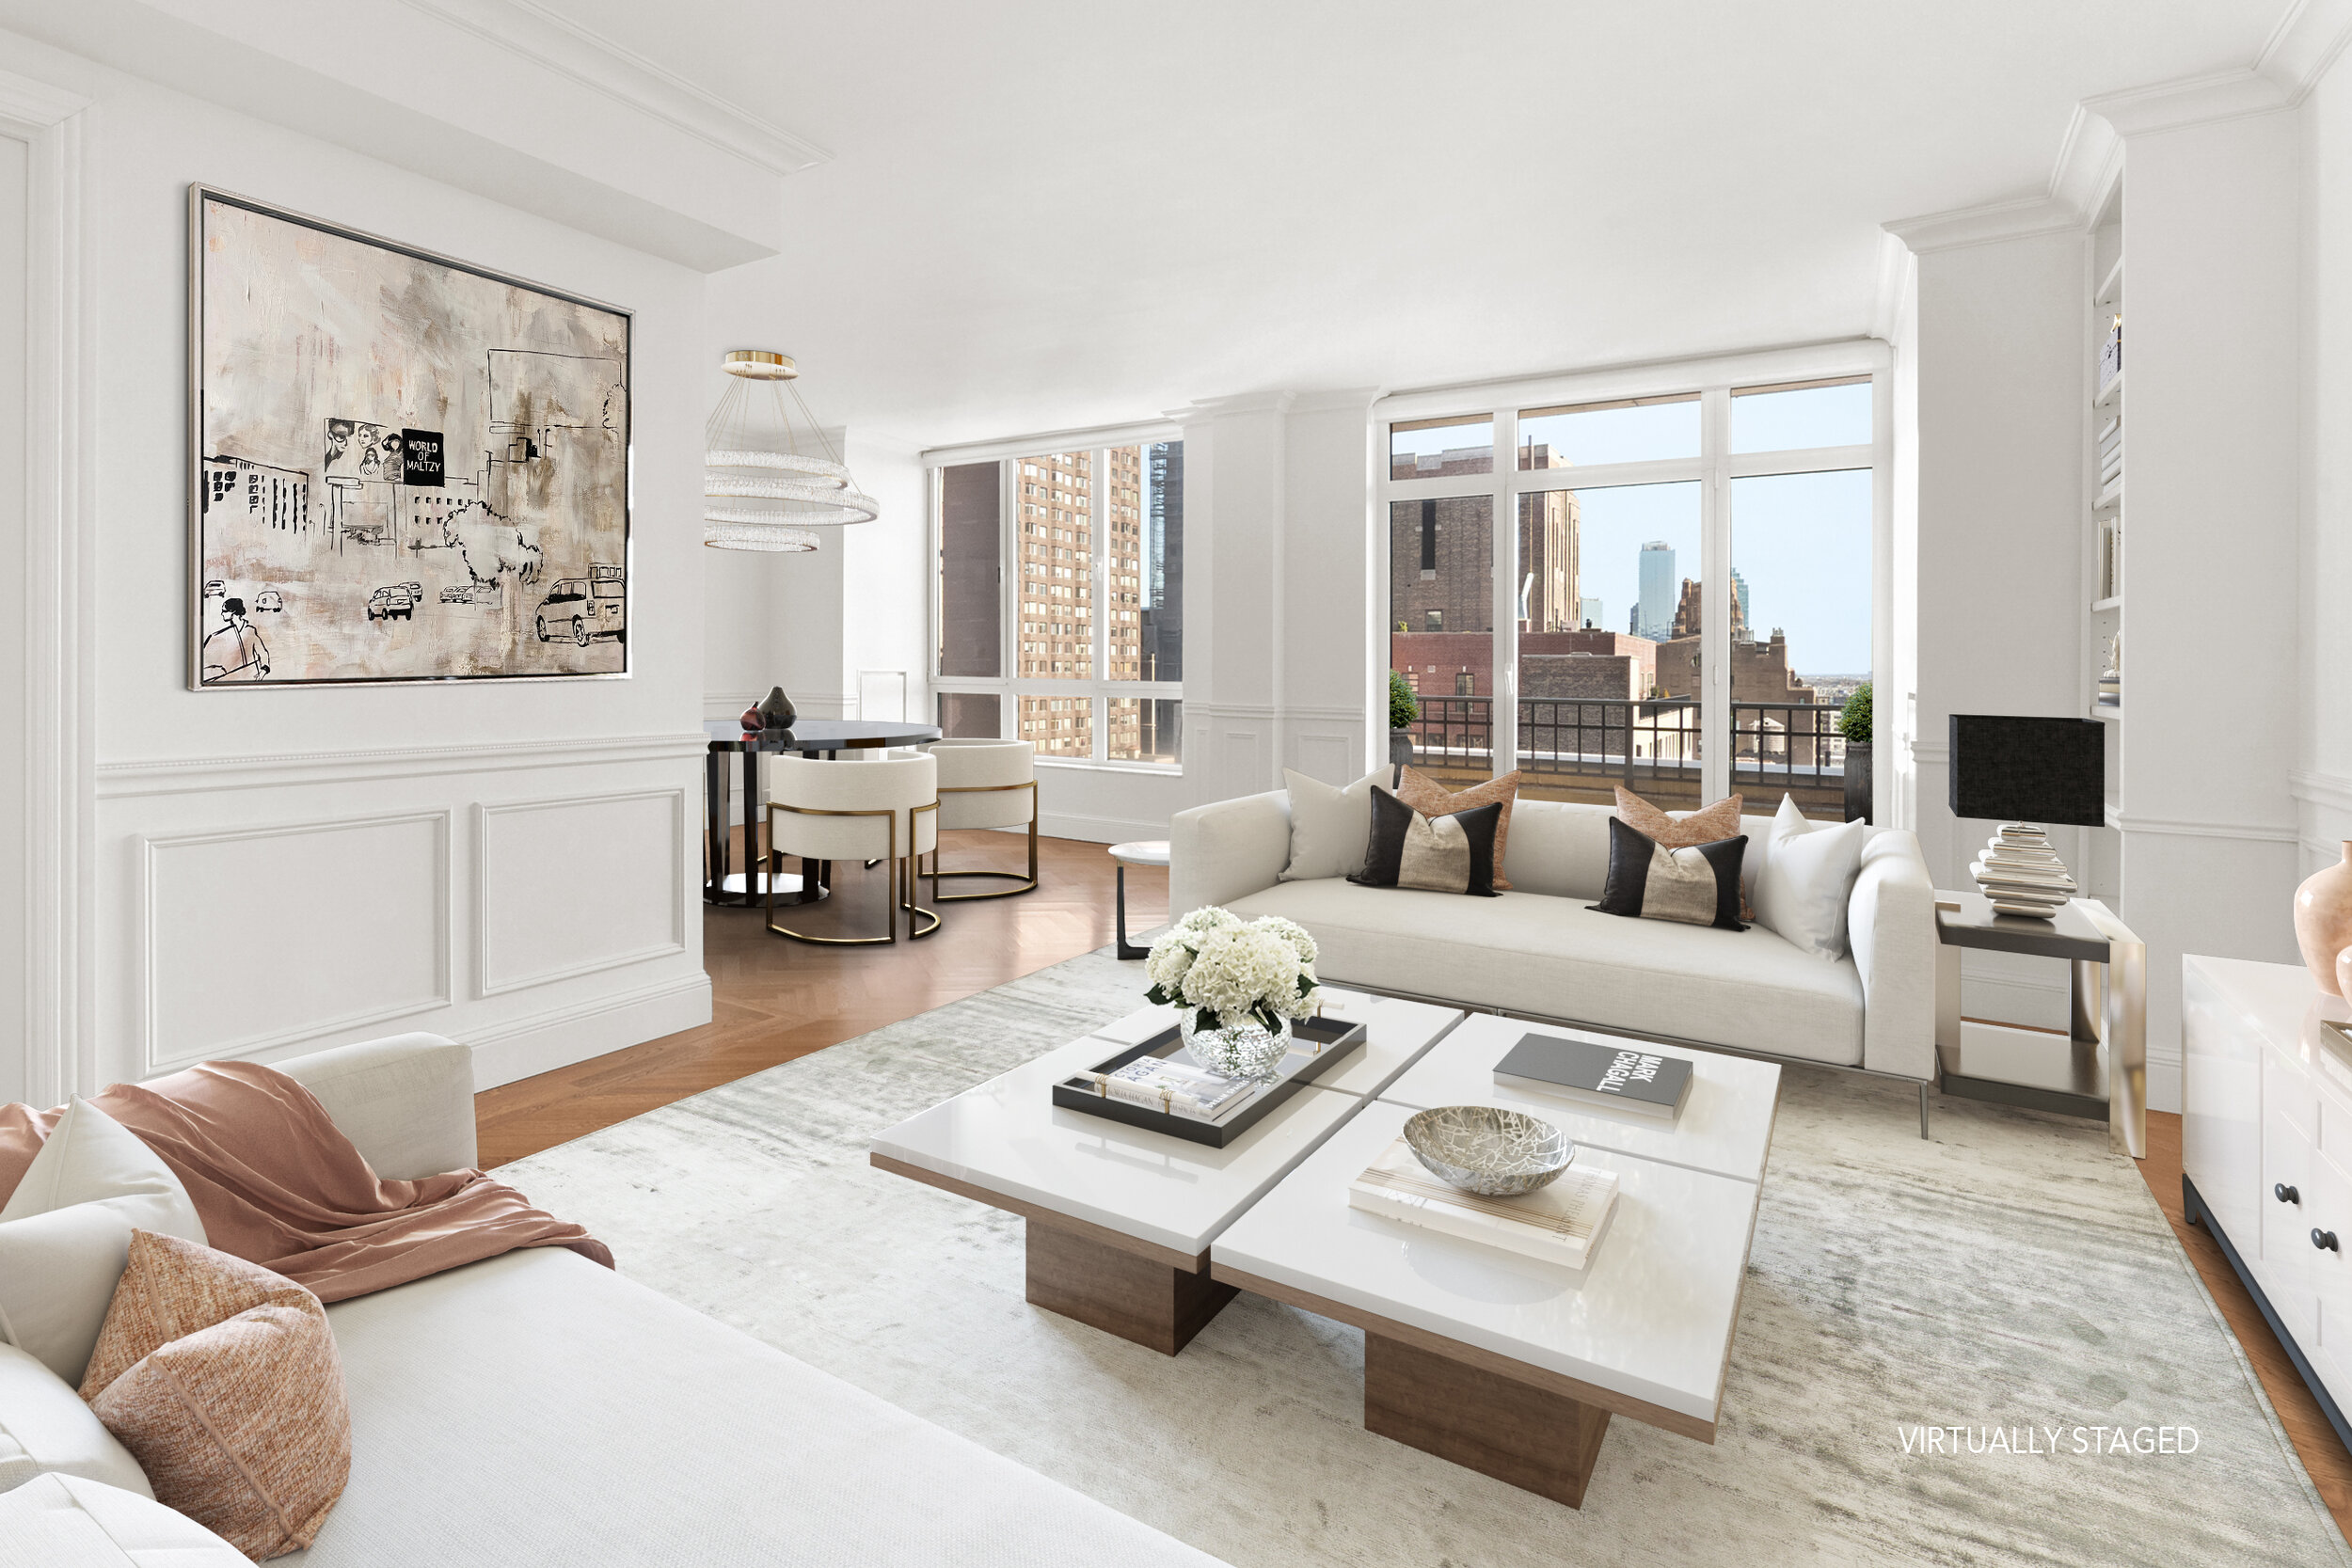  “I could not be more thrilled to join The Beekman Regent family and help connect qualified buyers and renters with such warm, gracious homes,” said Schoppmann, ranked in the top 20 agents by gross commission income at Douglas Elliman. “The Beekman R